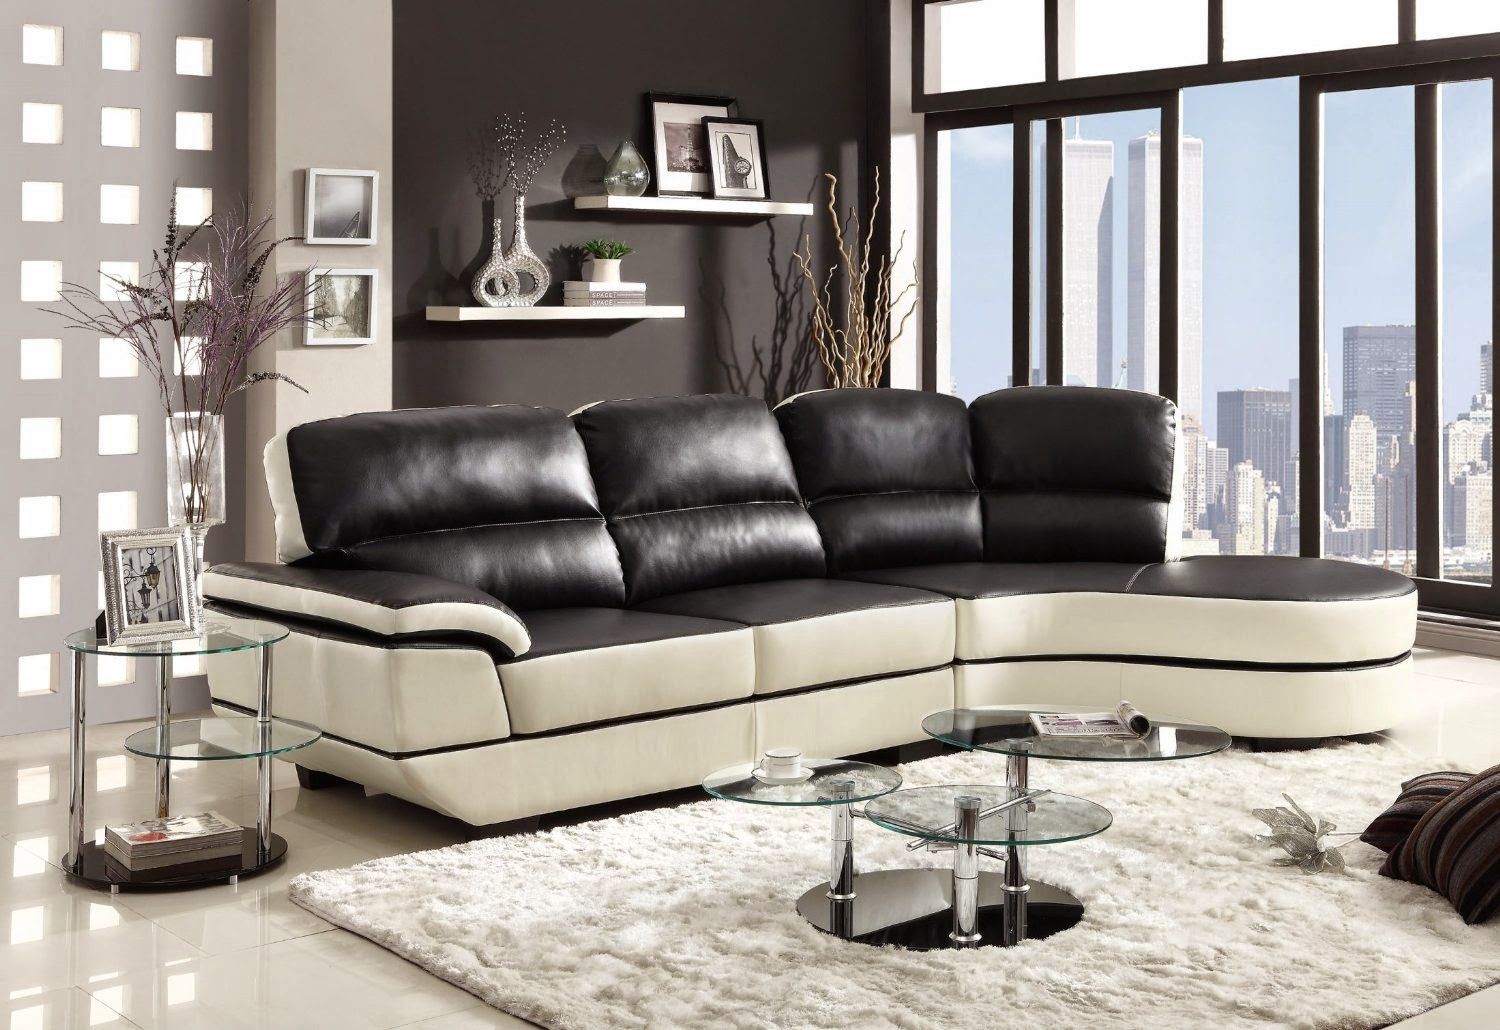 Curved Sofa Website Reviews: Curved Sectional Sofa With Chaise With Regard To 4pc Crowningshield Contemporary Chaise Sectional Sofas (Photo 4 of 15)